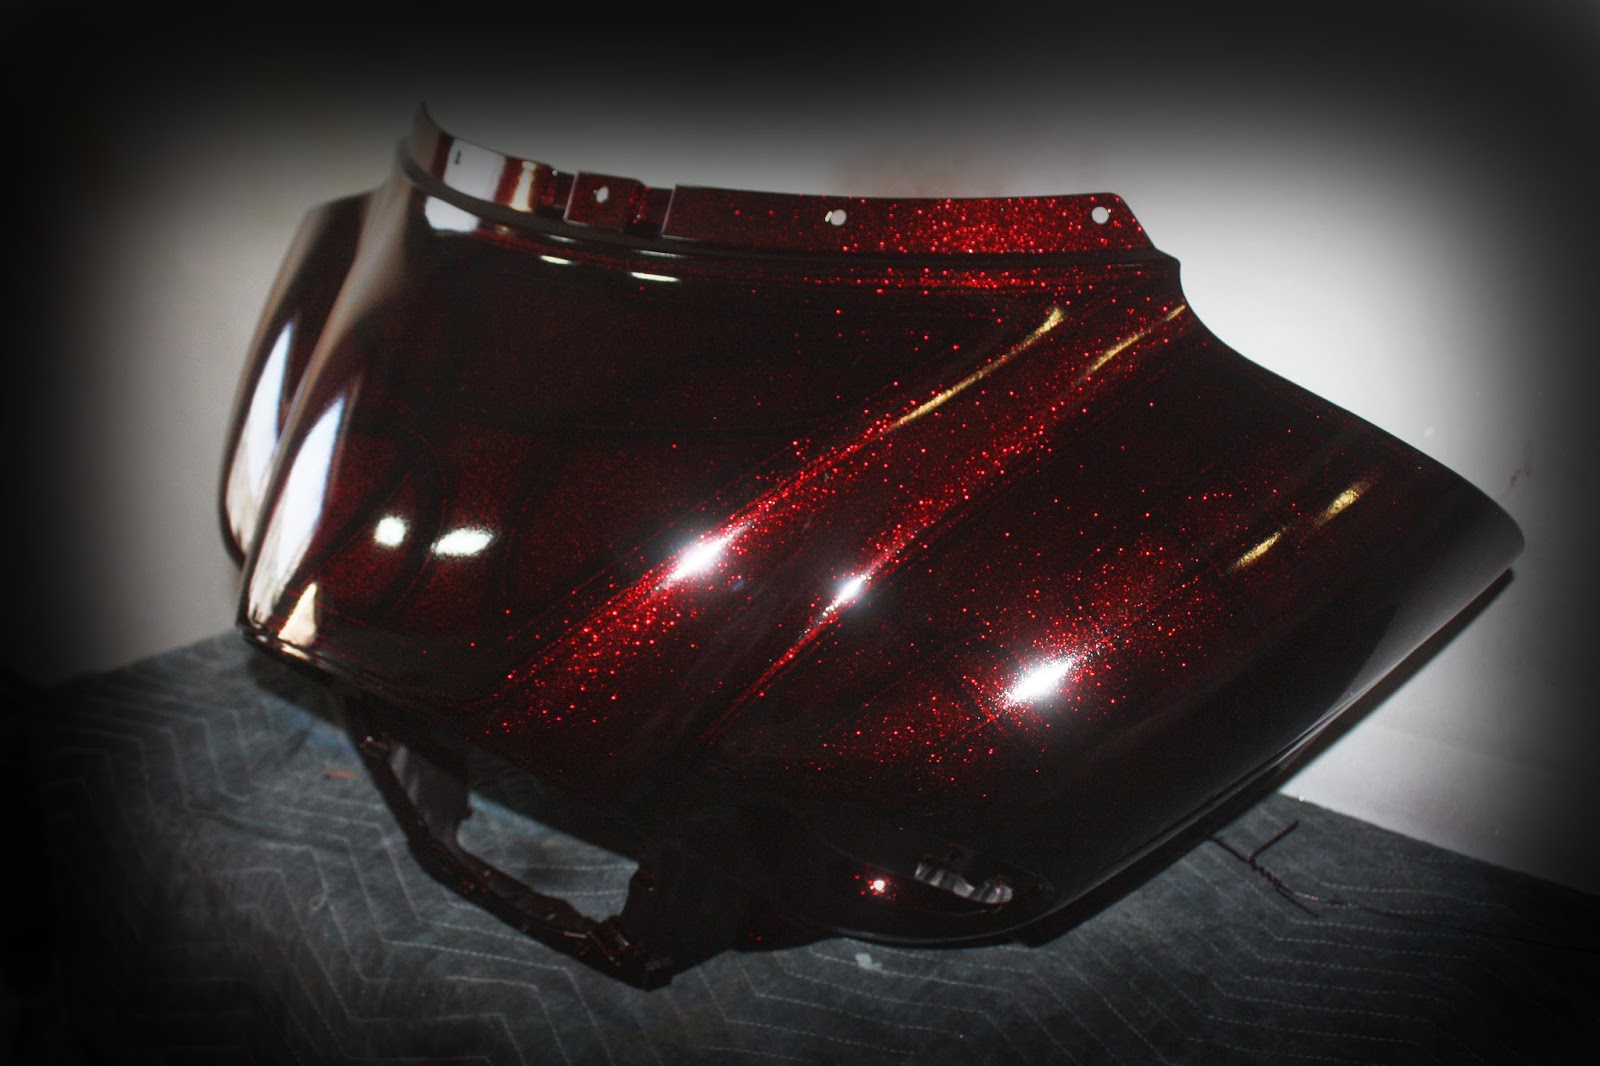 Online Motorcycle Paint Shop: Candy red metal flake on black